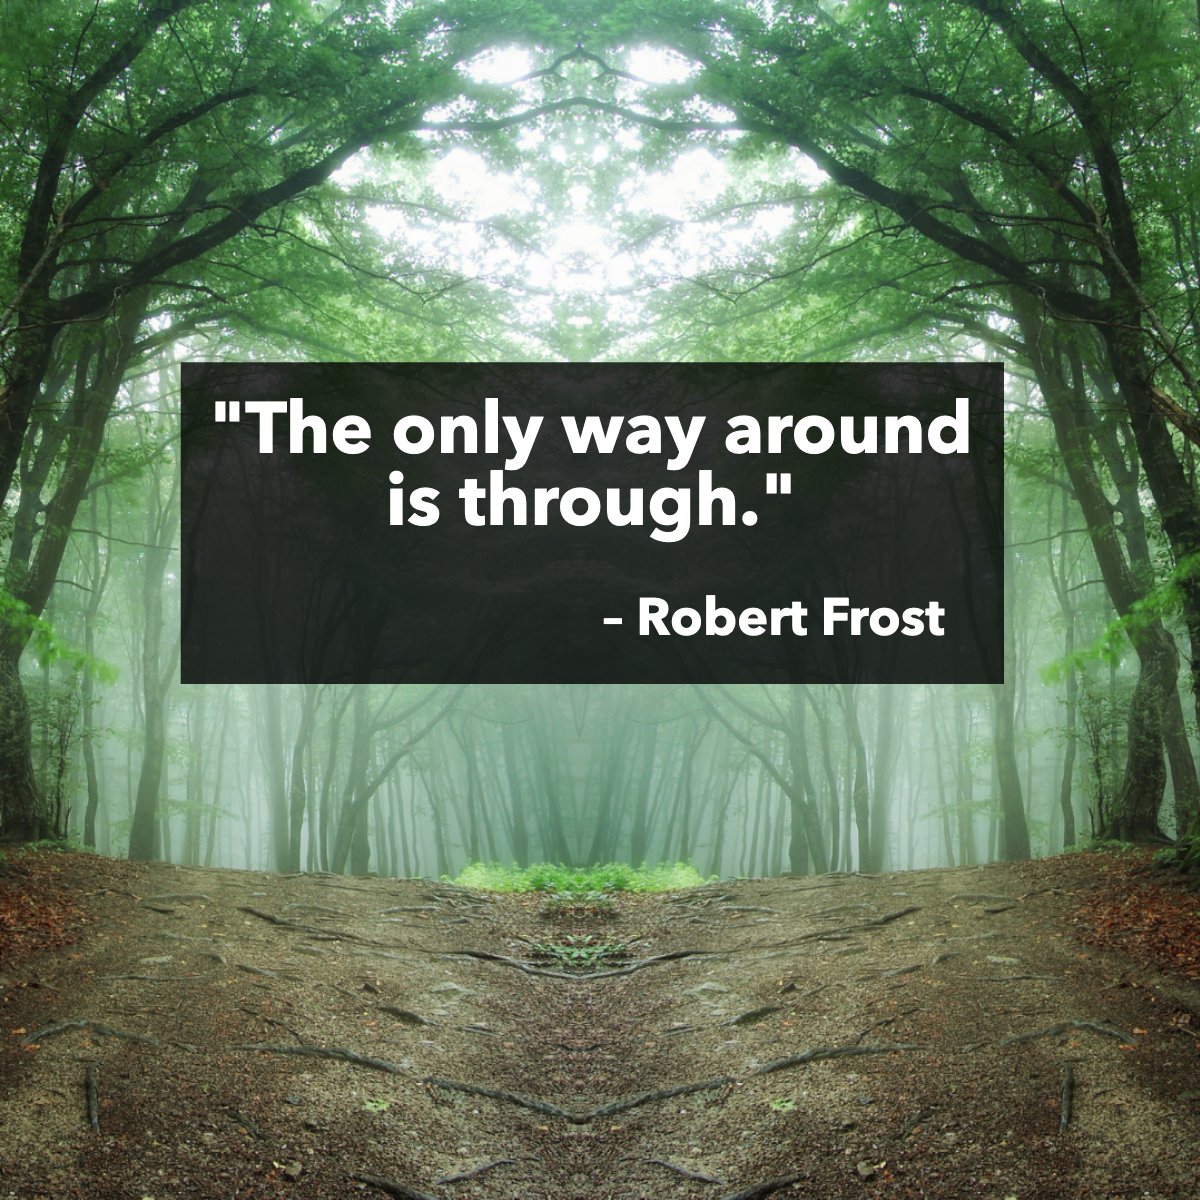 'The only way around is through.' 👌
– Robert Frost

What obstacles are you conquering today? 

#challenges #inspriring #inspirational #woods #forest #robertfrost #quote